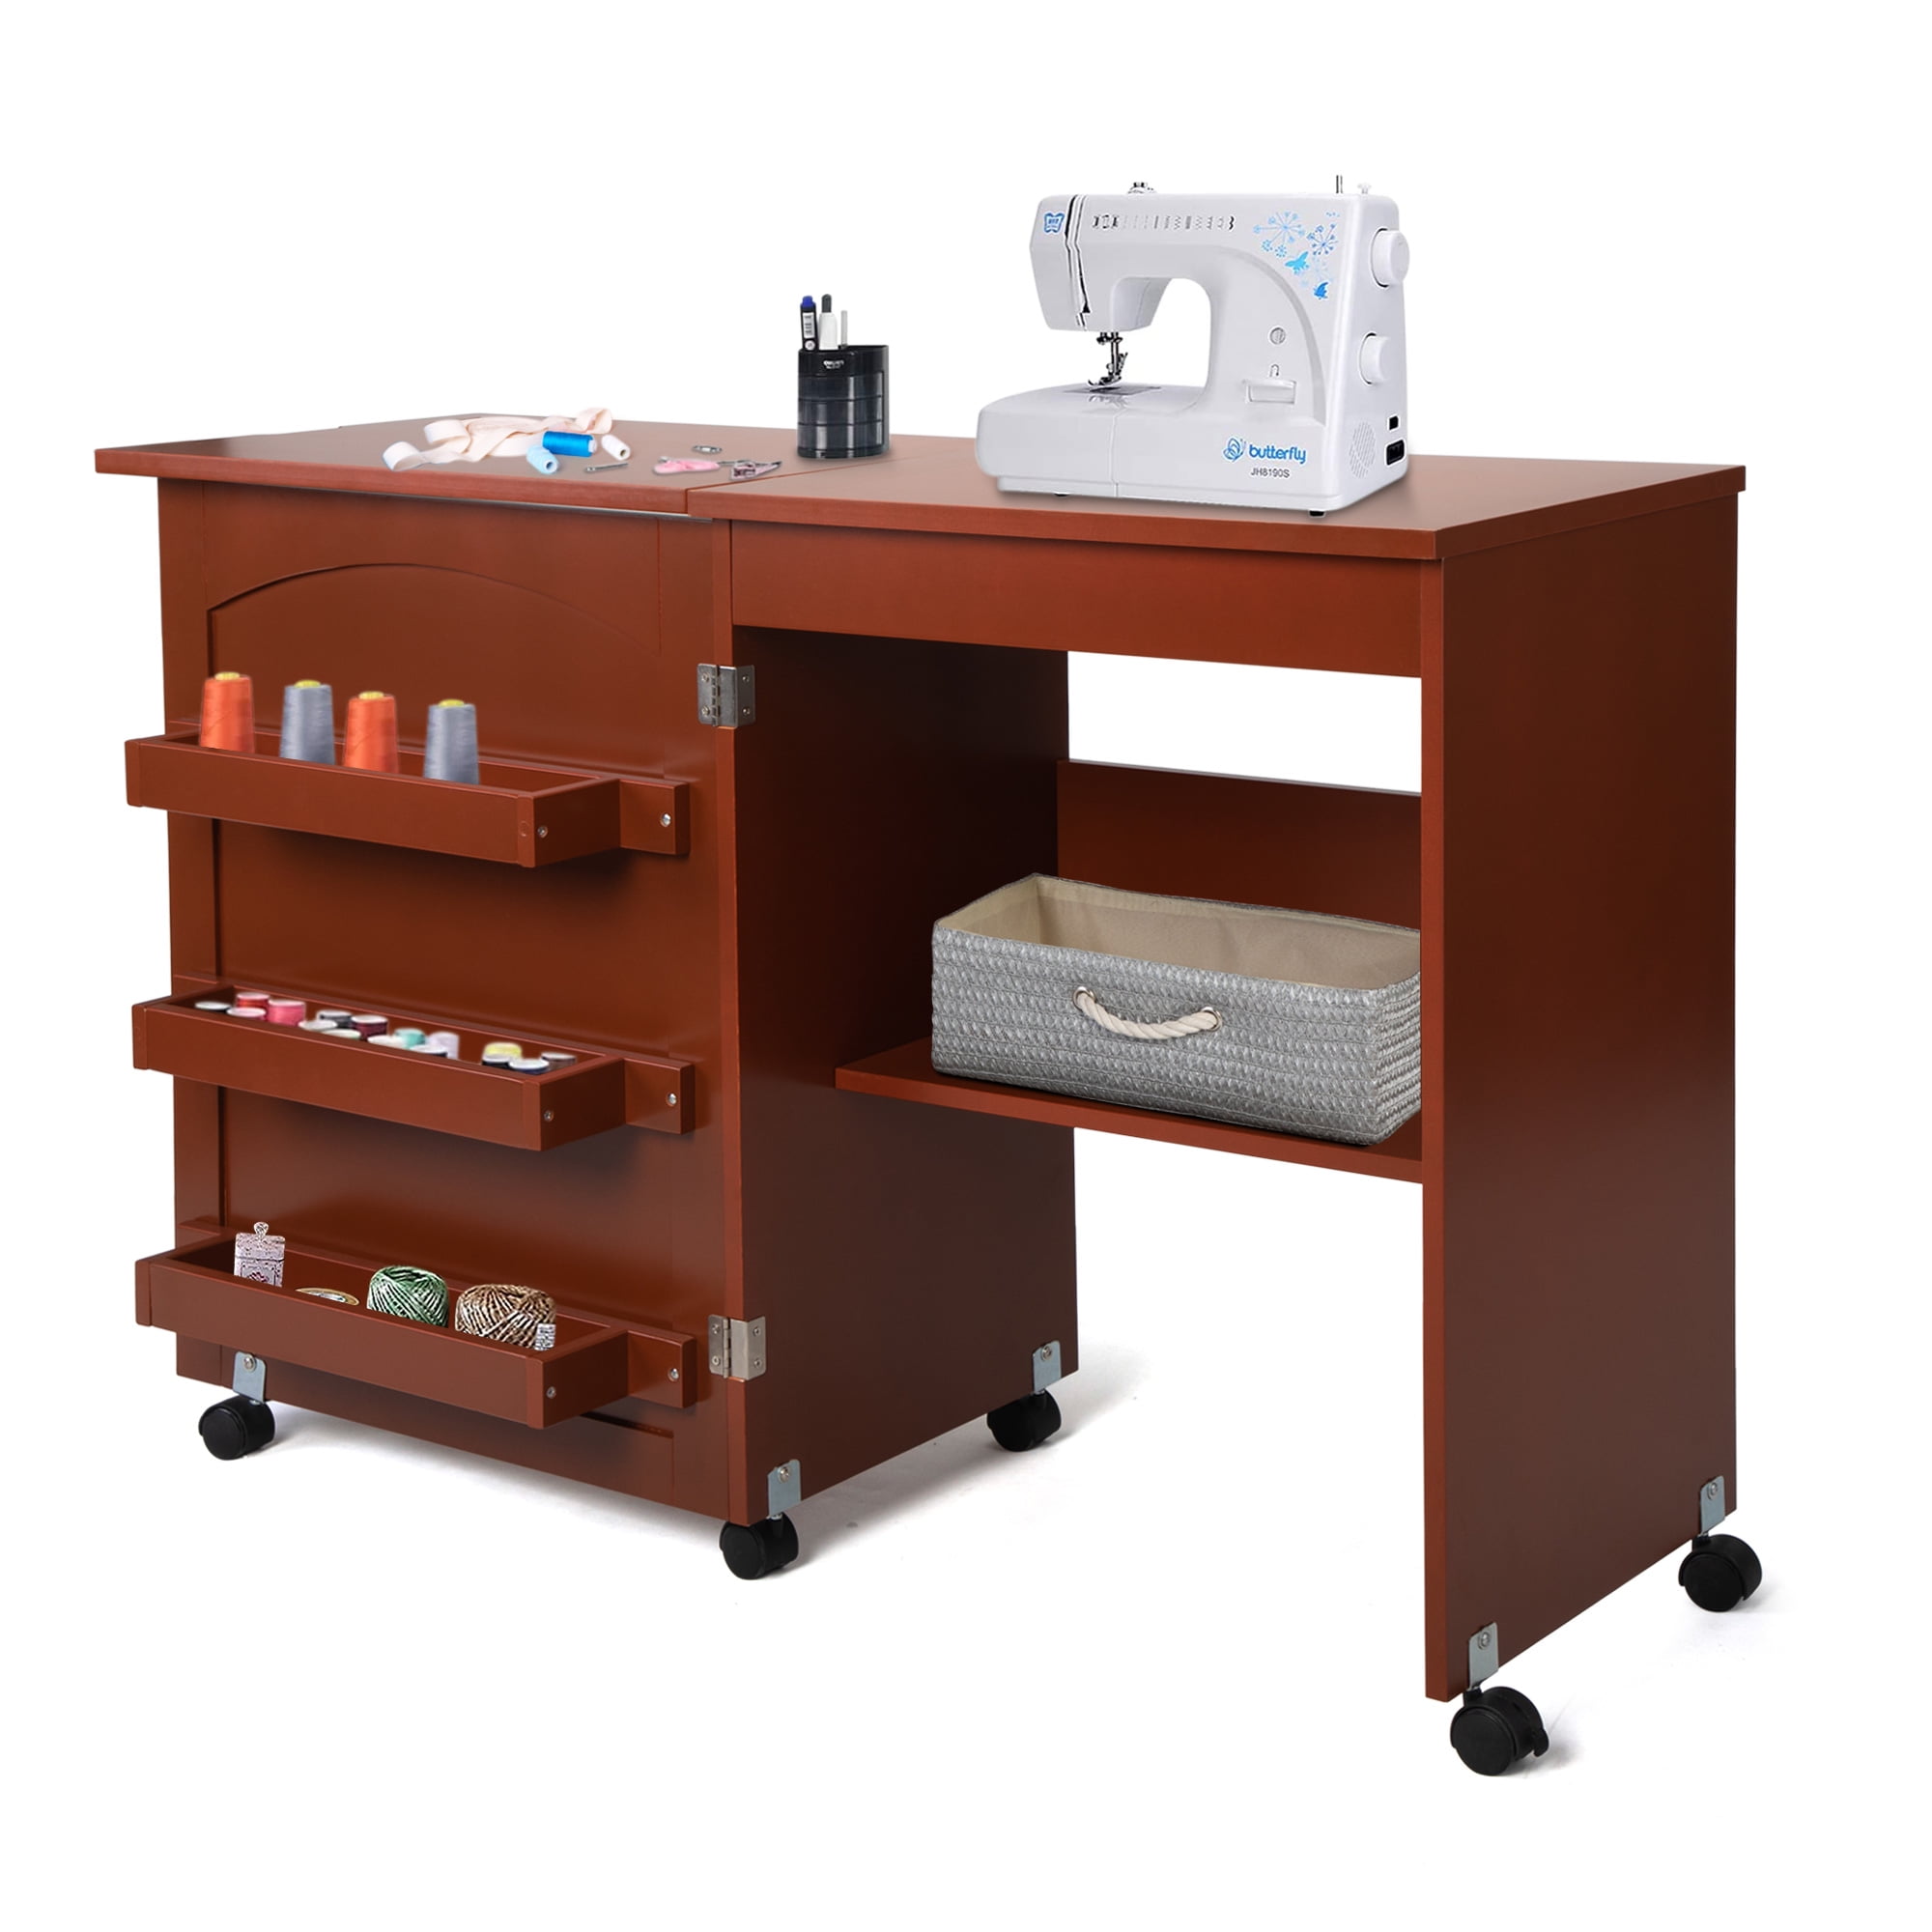 Wood Folding Sewing Craft Table, Art Desk with Storage Shelves and Lockable  Casters, Brown 